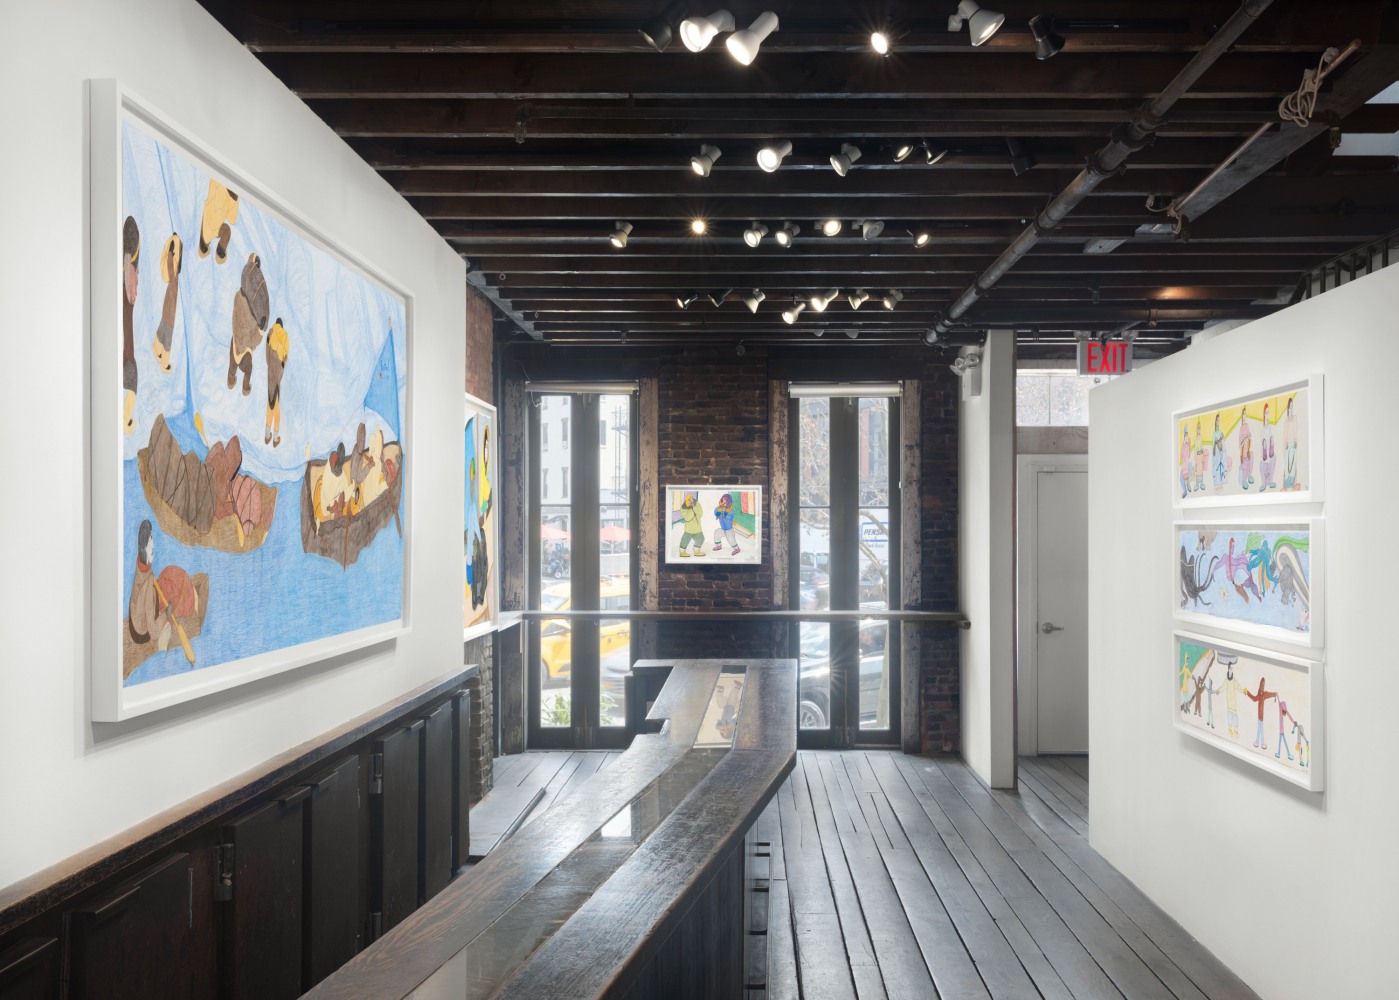 Installation view of Shuvinai Ashoona's &quot;Looking Out, Looking In&quot; exhibition of four works done in colored pencil and ink on paper.